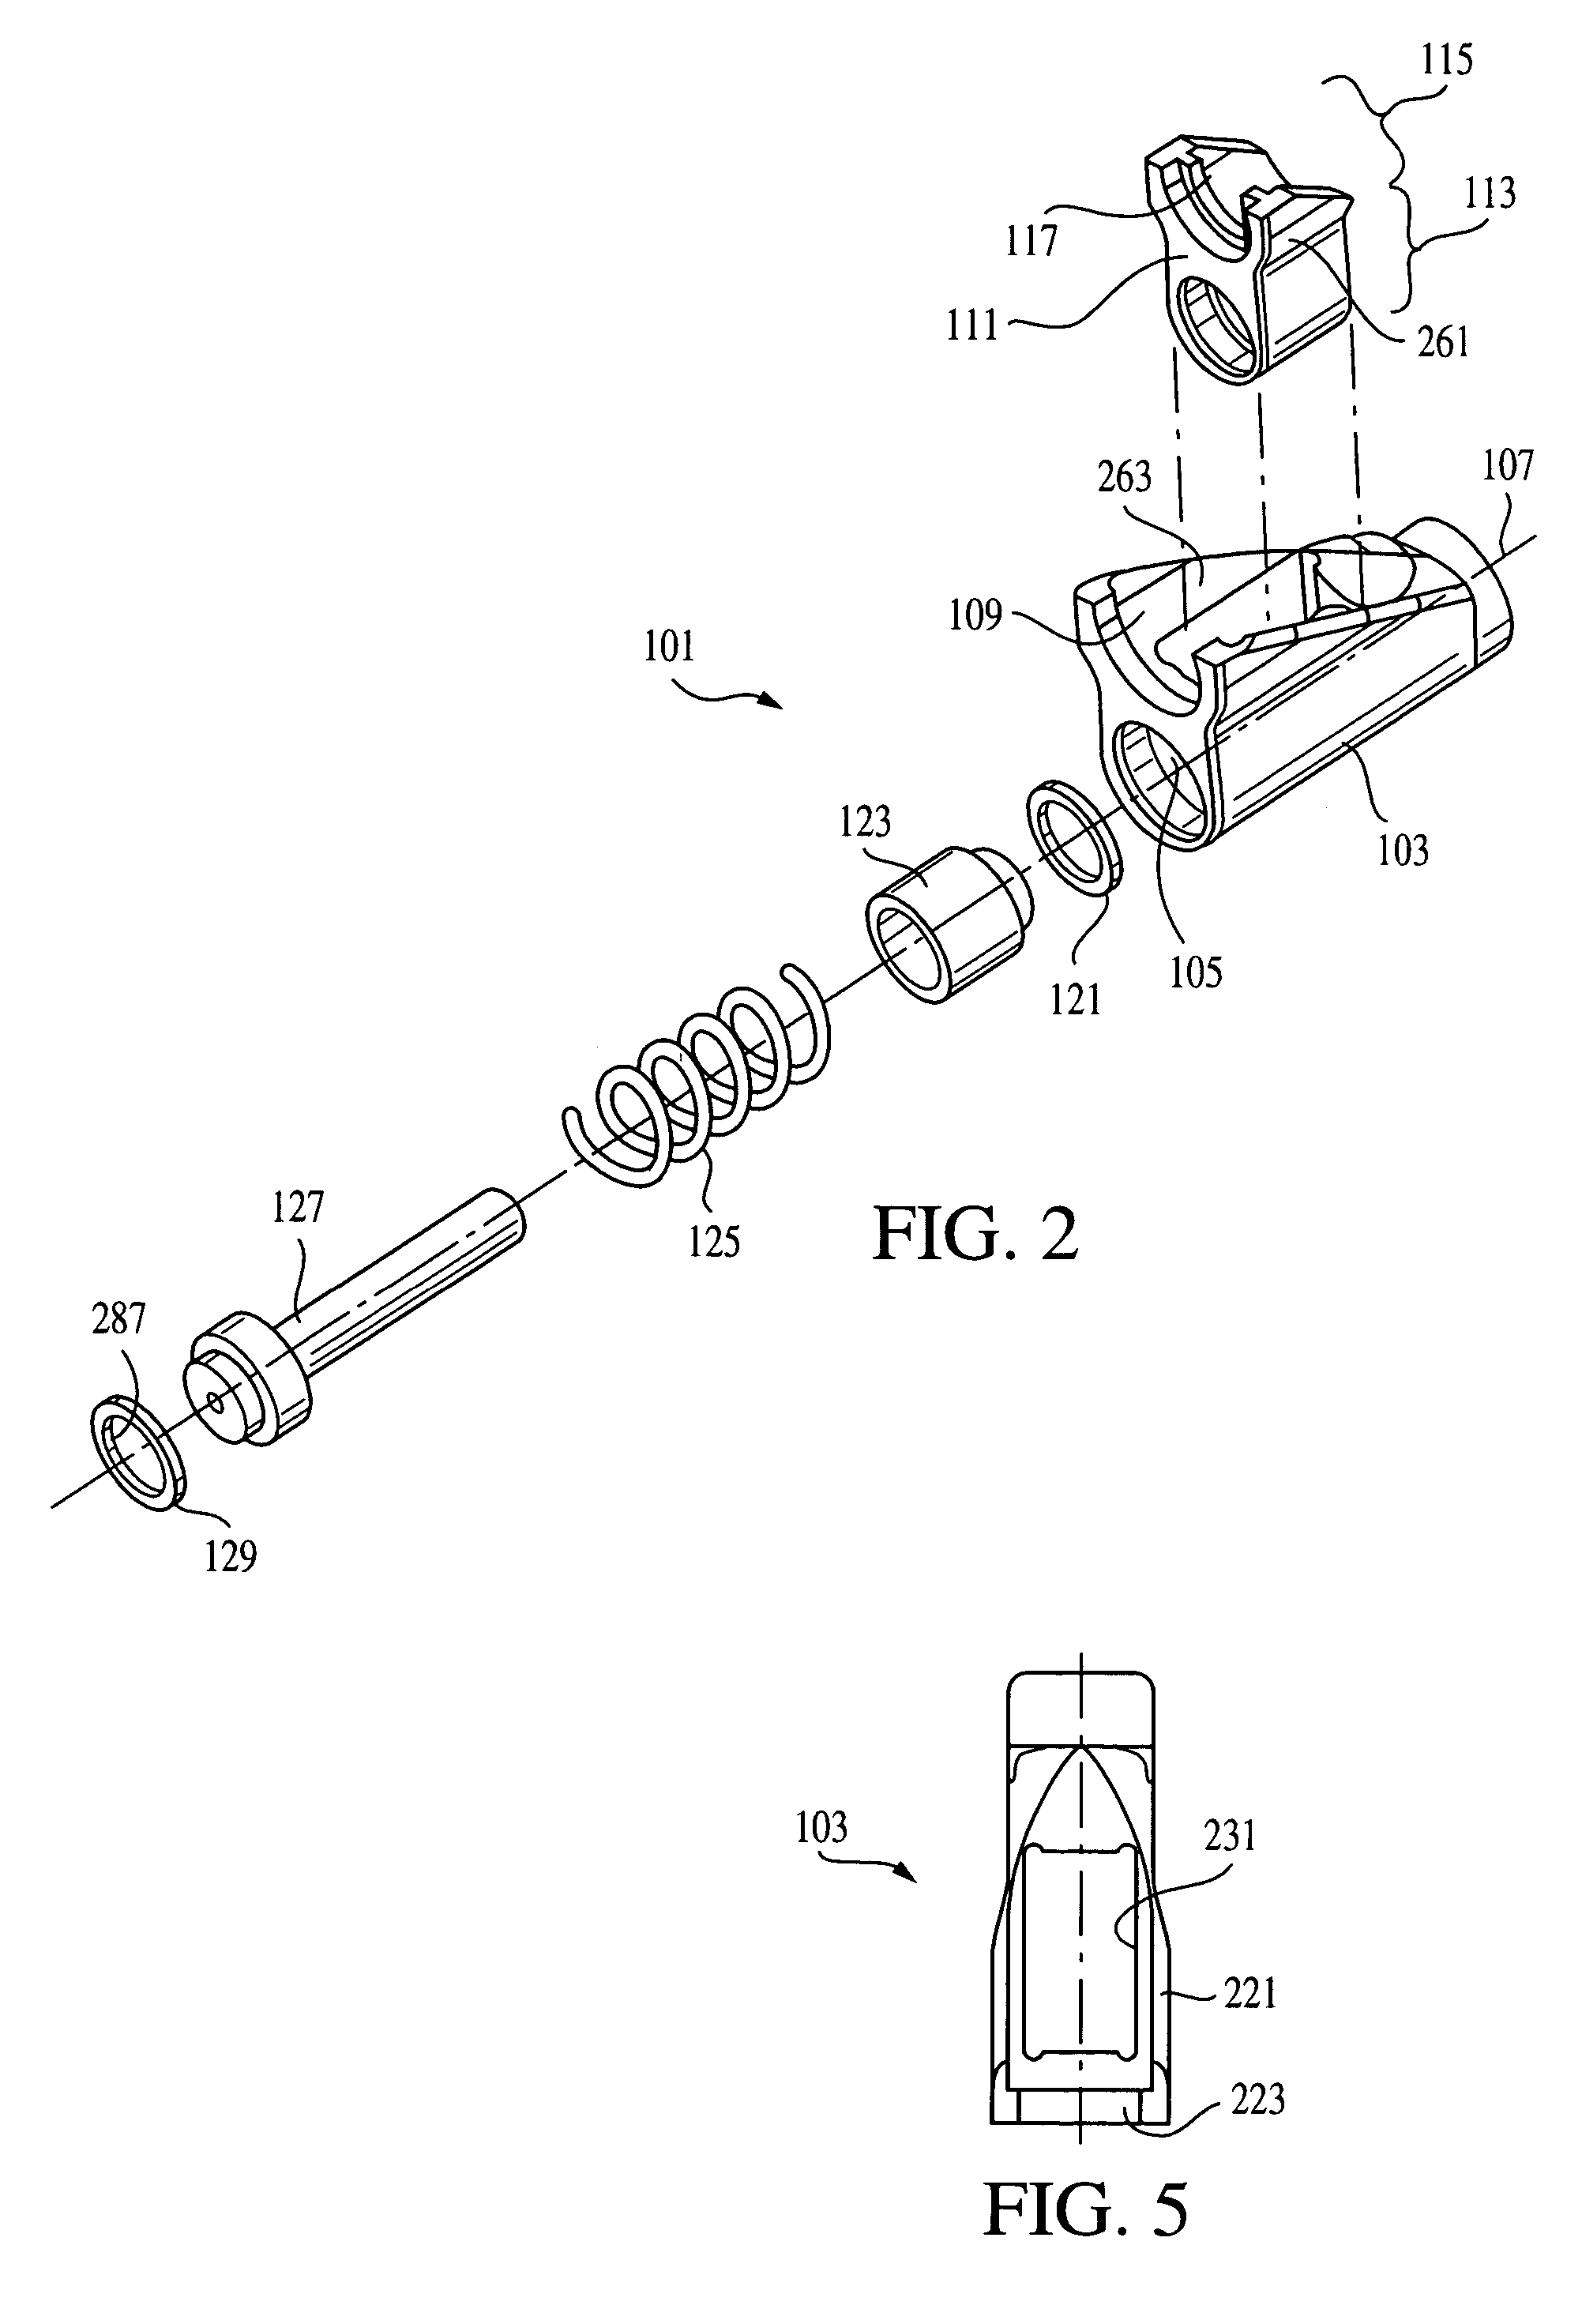 Axial swage tool